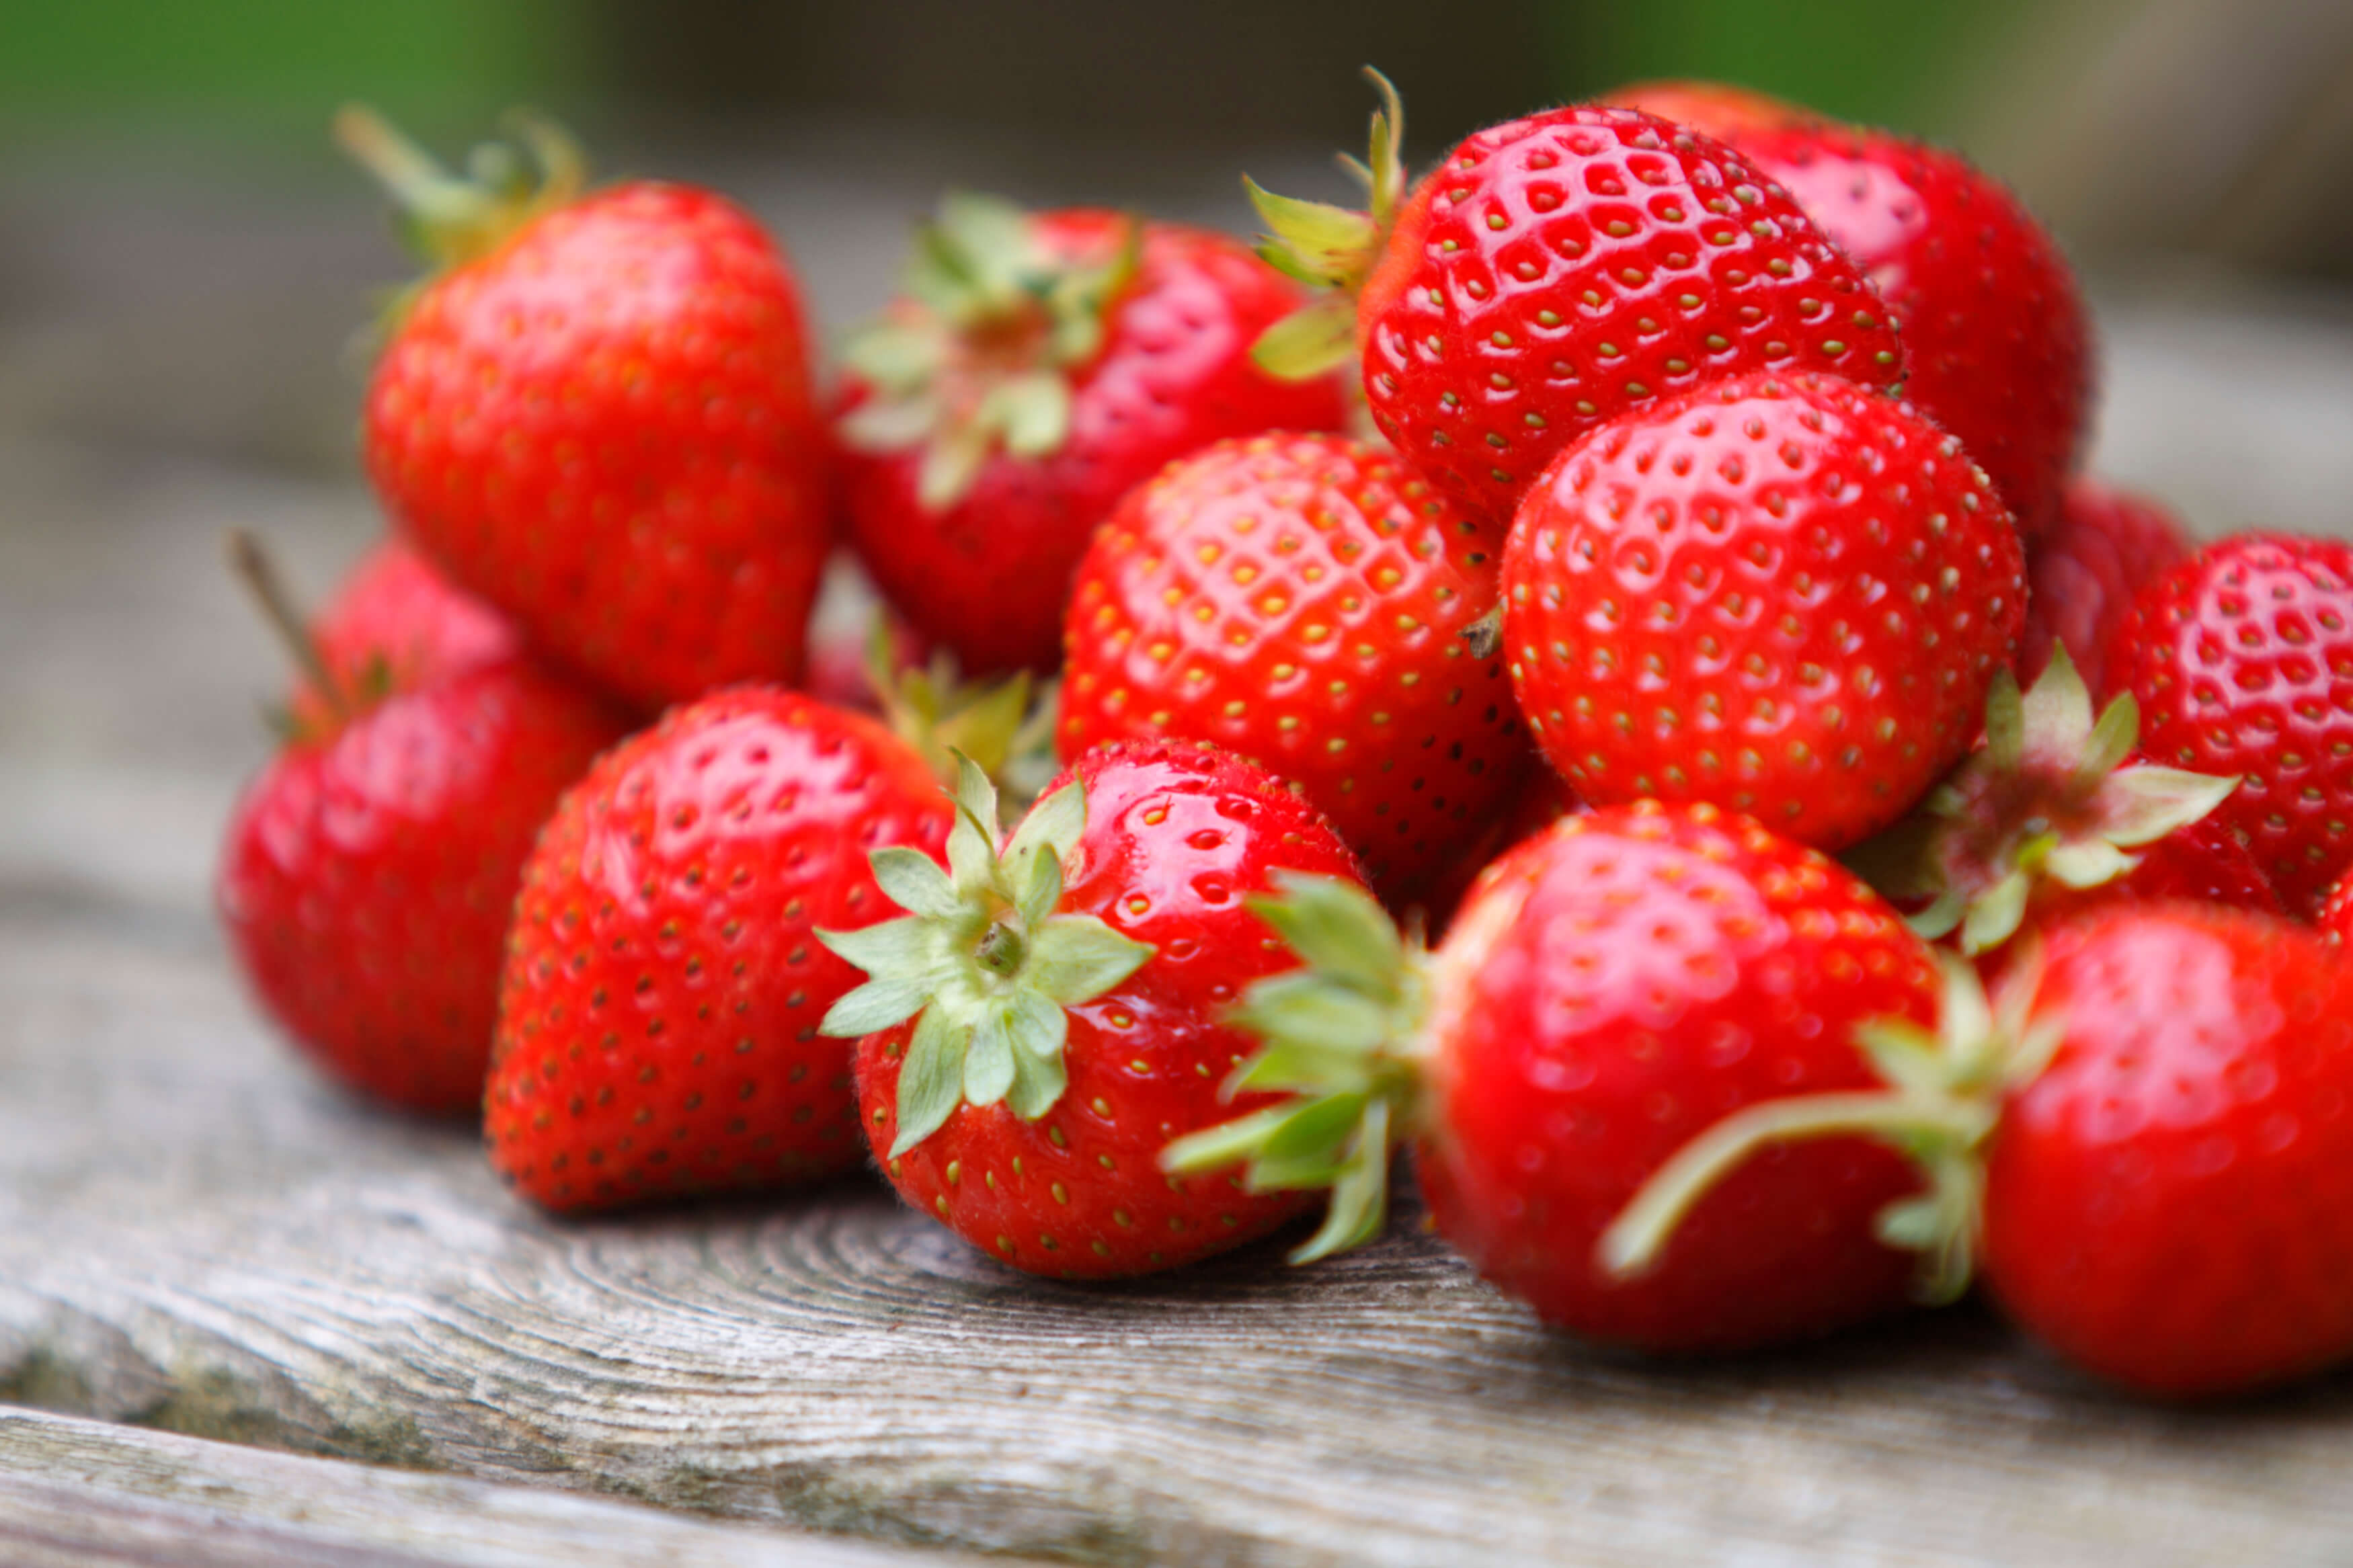 Spring vegetables and fruits: strawberries